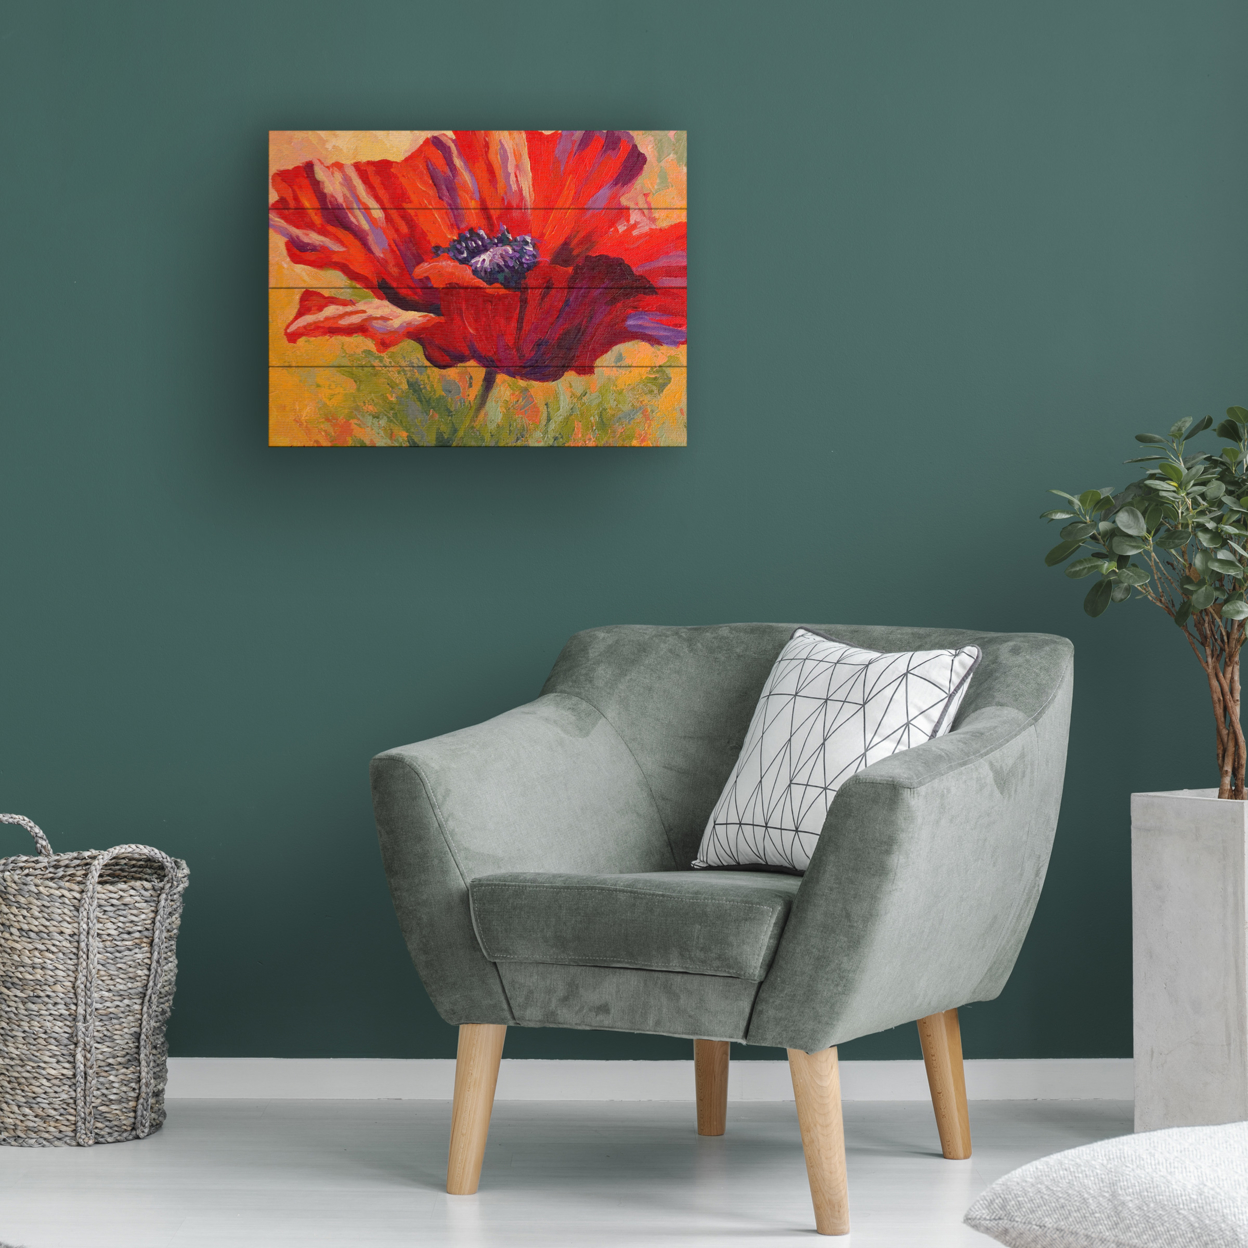 Wall Art 12 X 16 Inches Titled Red Poppy II Ready To Hang Printed On Wooden Planks